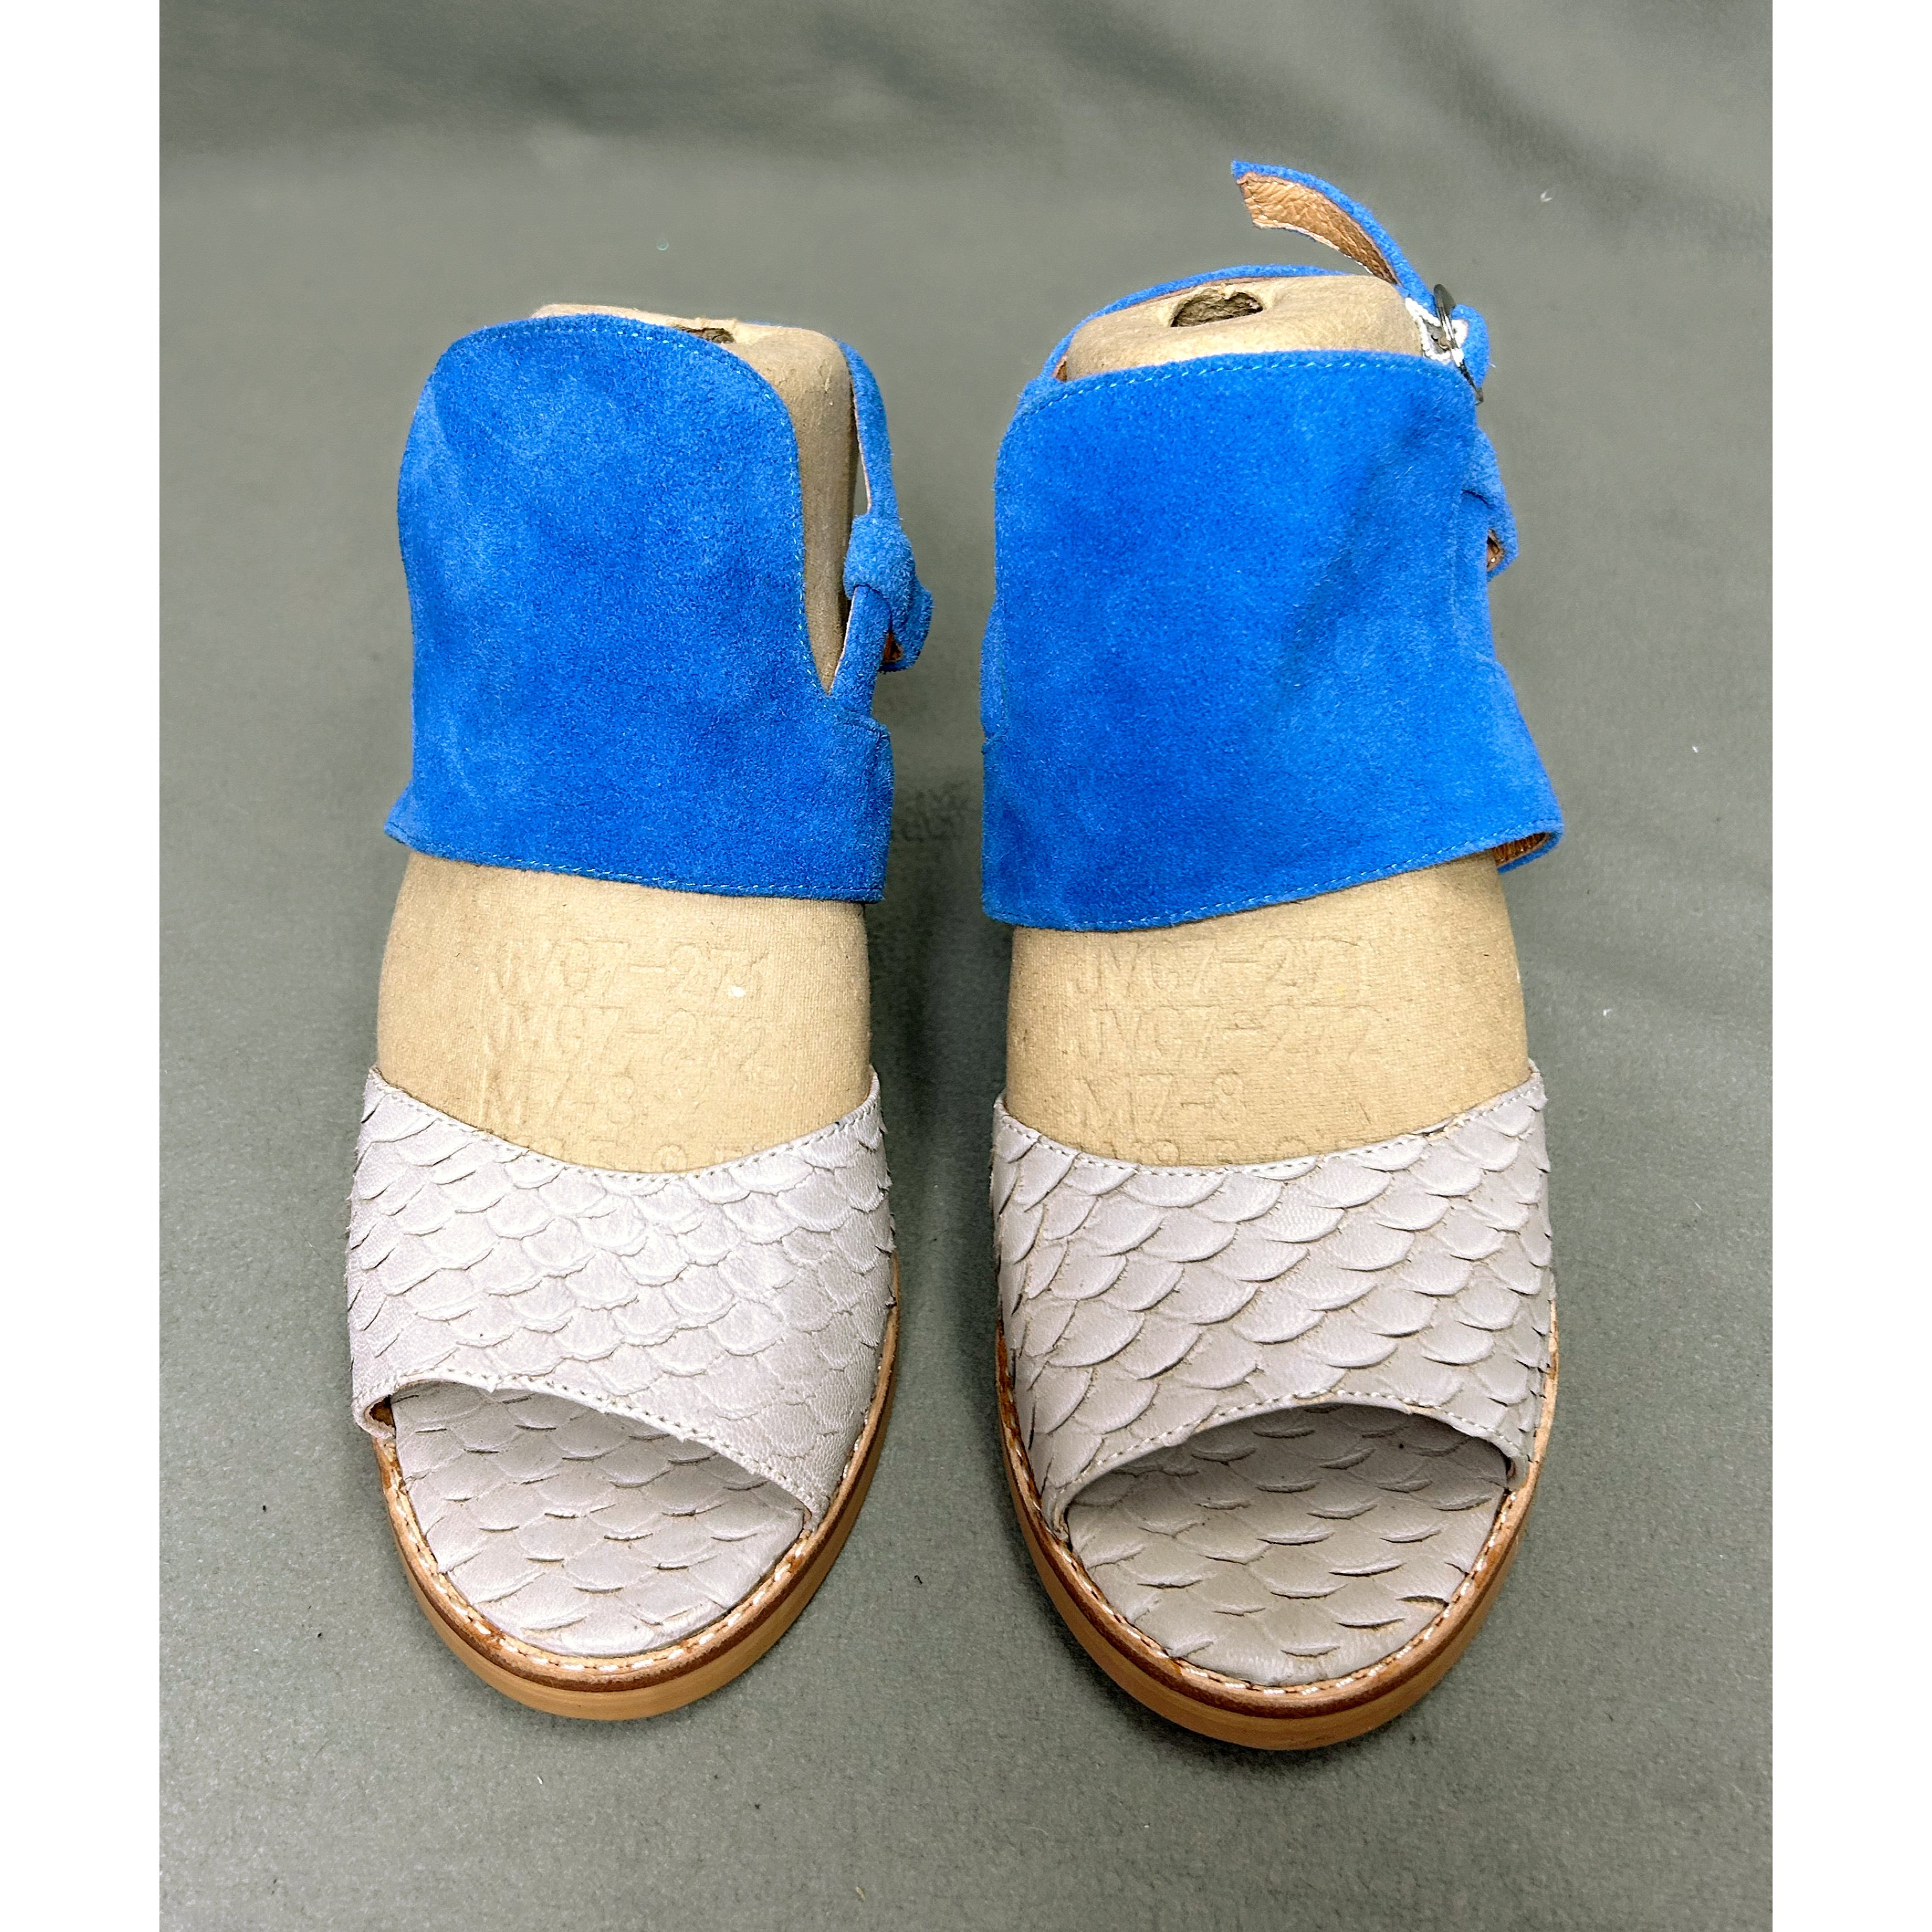 Jeffrey Campbell cobalt and pale gray shoes, size 8, BRAND NEW!